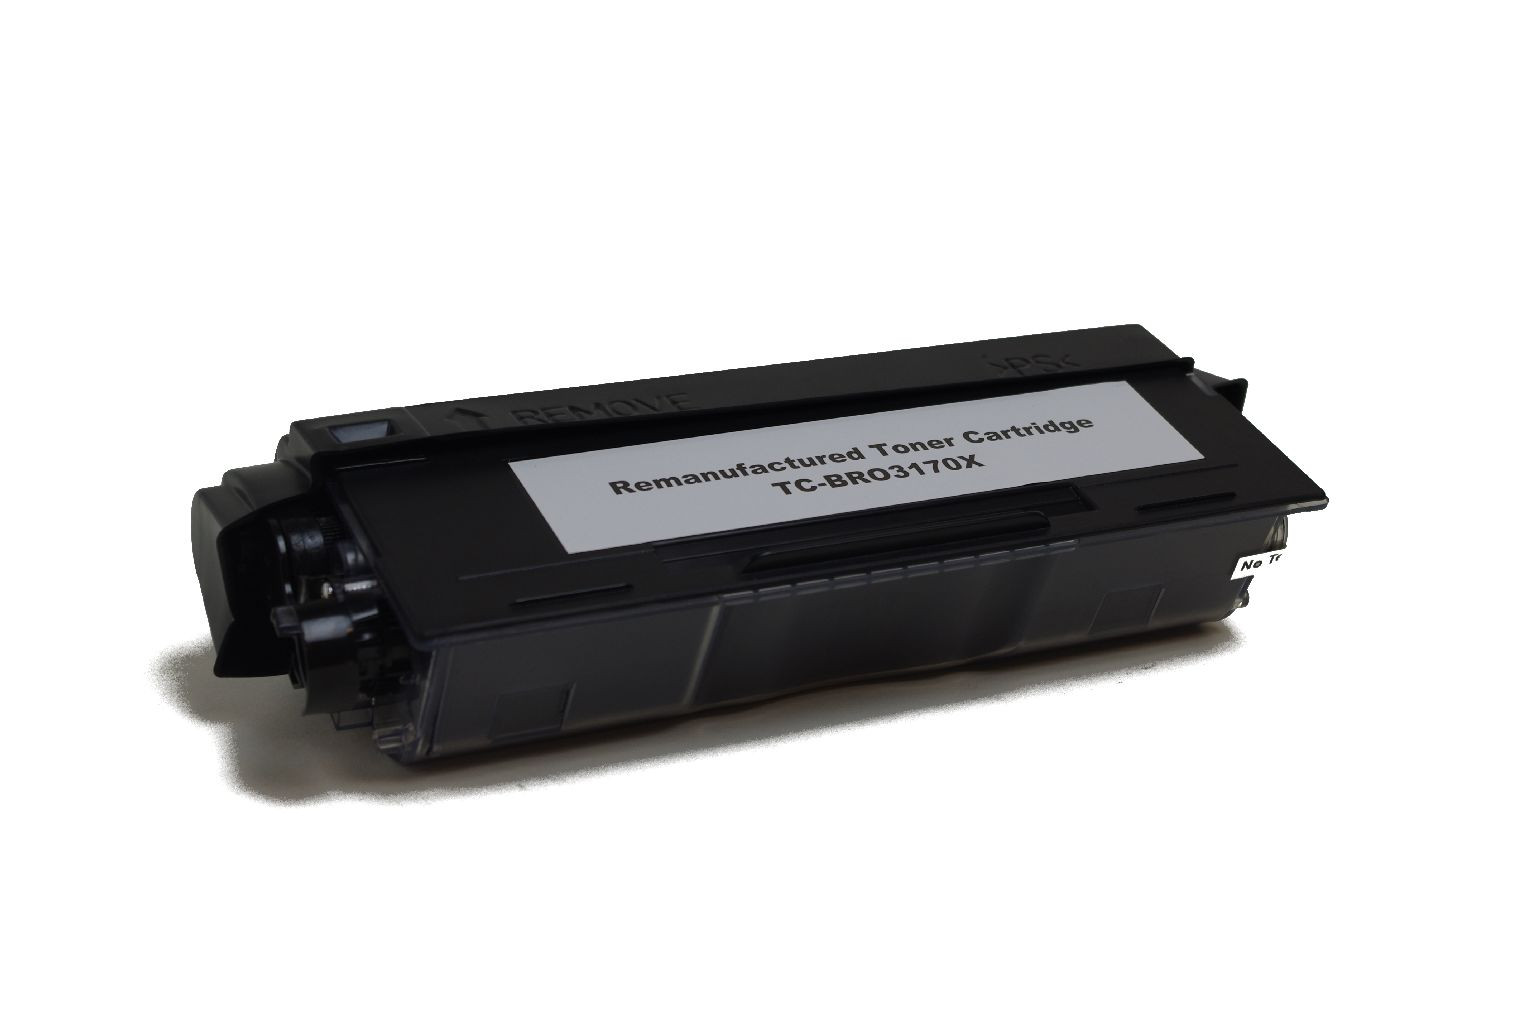 Toner cartridge (alternative) compatible with Brother - TN3170 / TN 3170 - for HL 5200 / 5240 / L / 5250 DN / DNHY / 5270 DN / DN2LT / 5280 DW / MFC 8460 N / 8860 DN / N / 8870 DW / DCP 8060 / 8065 DN // X-Version with 12.000 pages